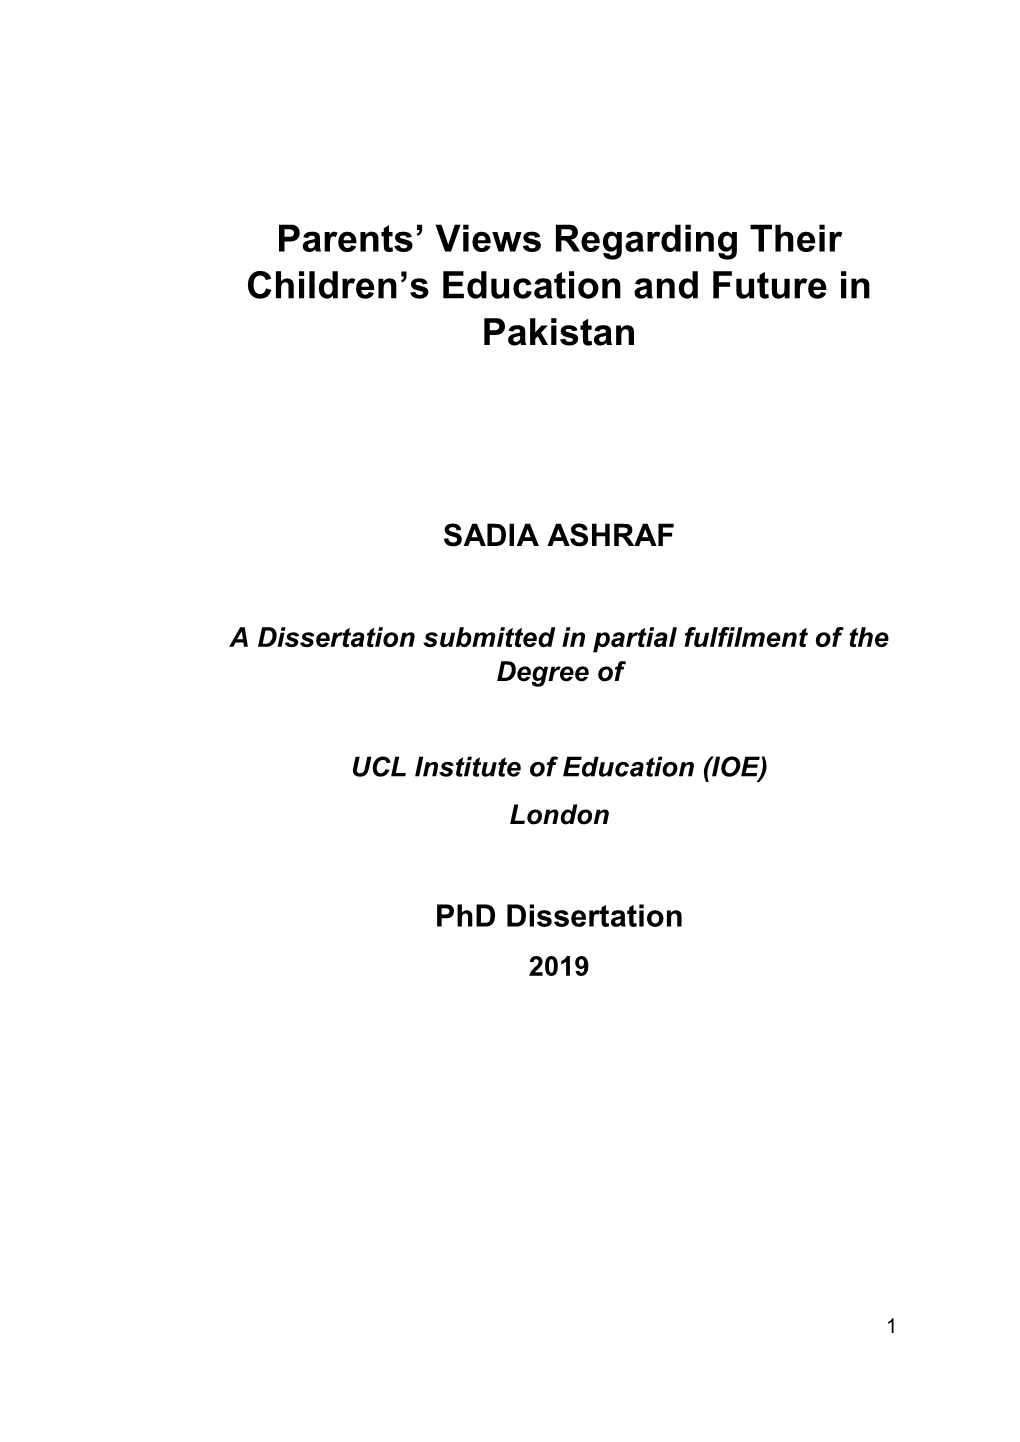 Parents' Views Regarding Their Children's Education and Future In